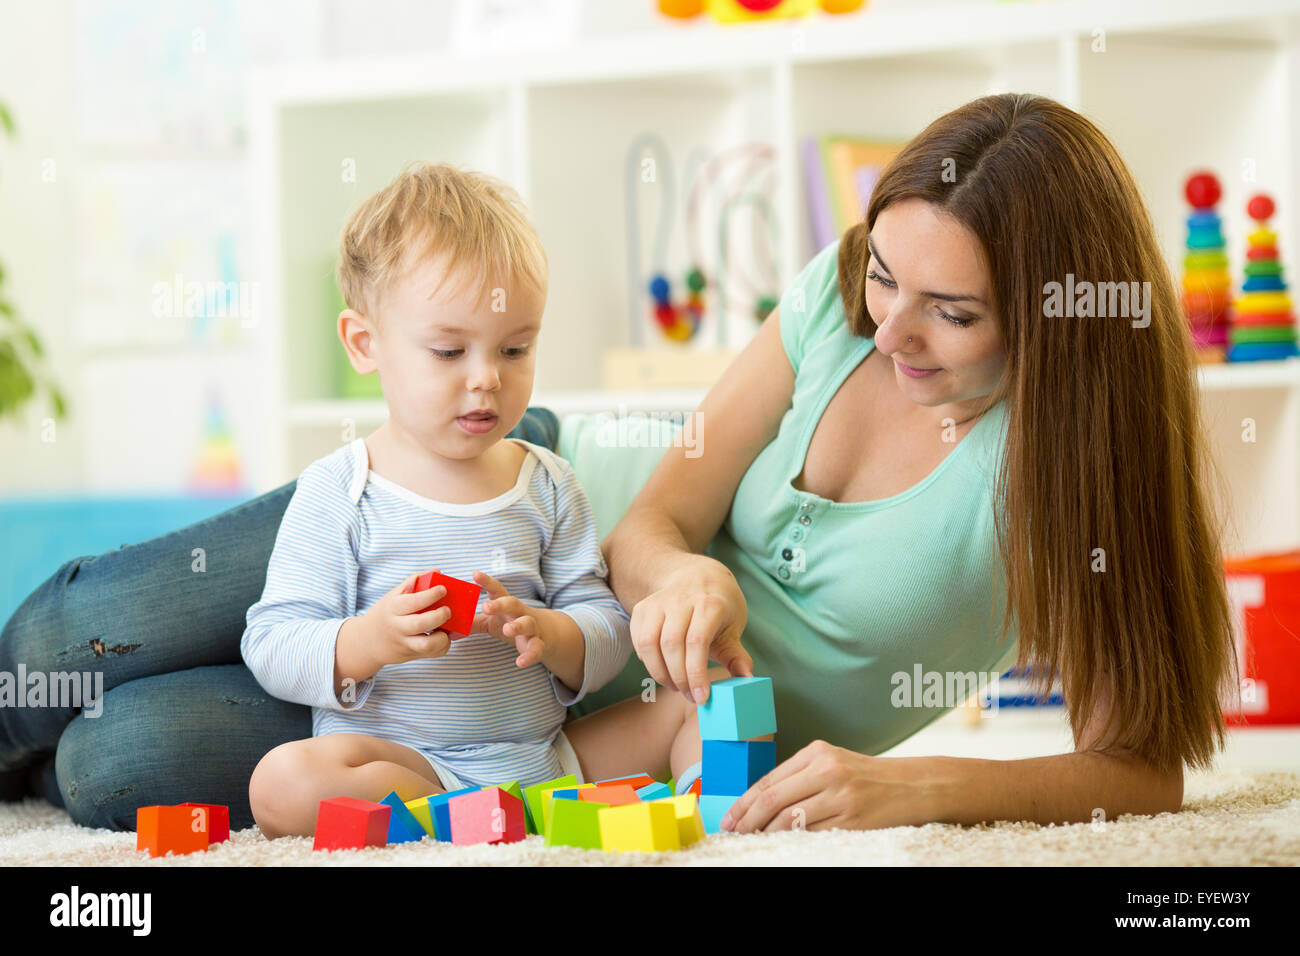 mom with her son child play together Stock Photo